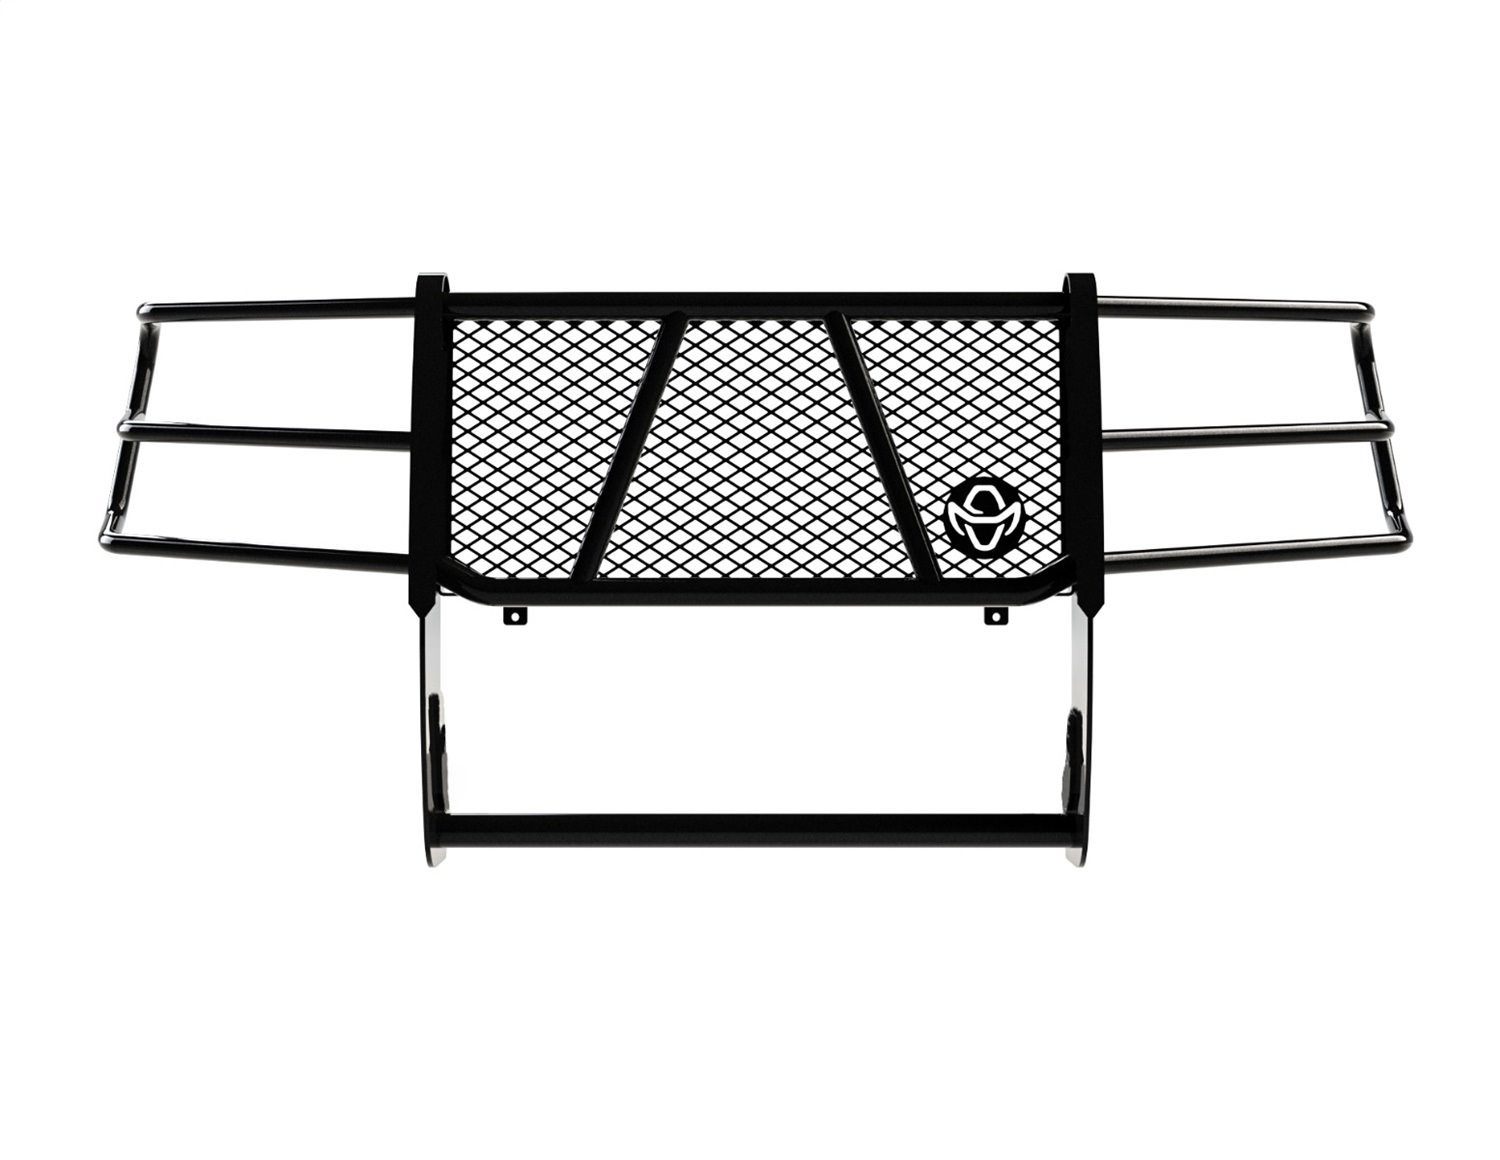 Legend Series Grille Guard For 2021 Chevy Suburban, Tahoe